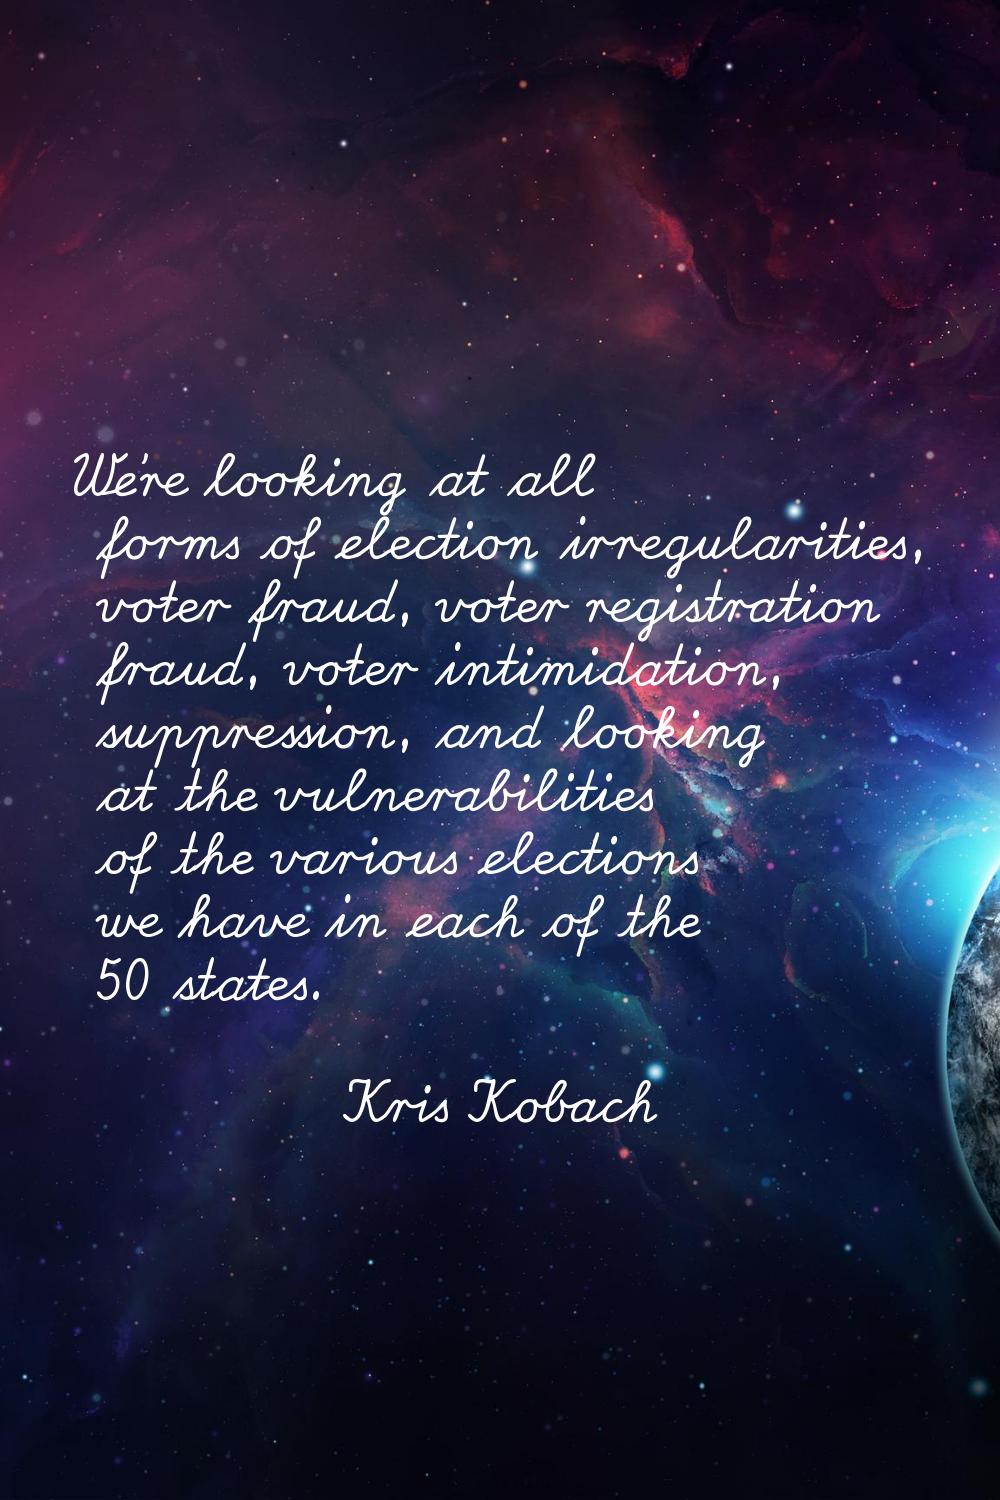 We're looking at all forms of election irregularities, voter fraud, voter registration fraud, voter